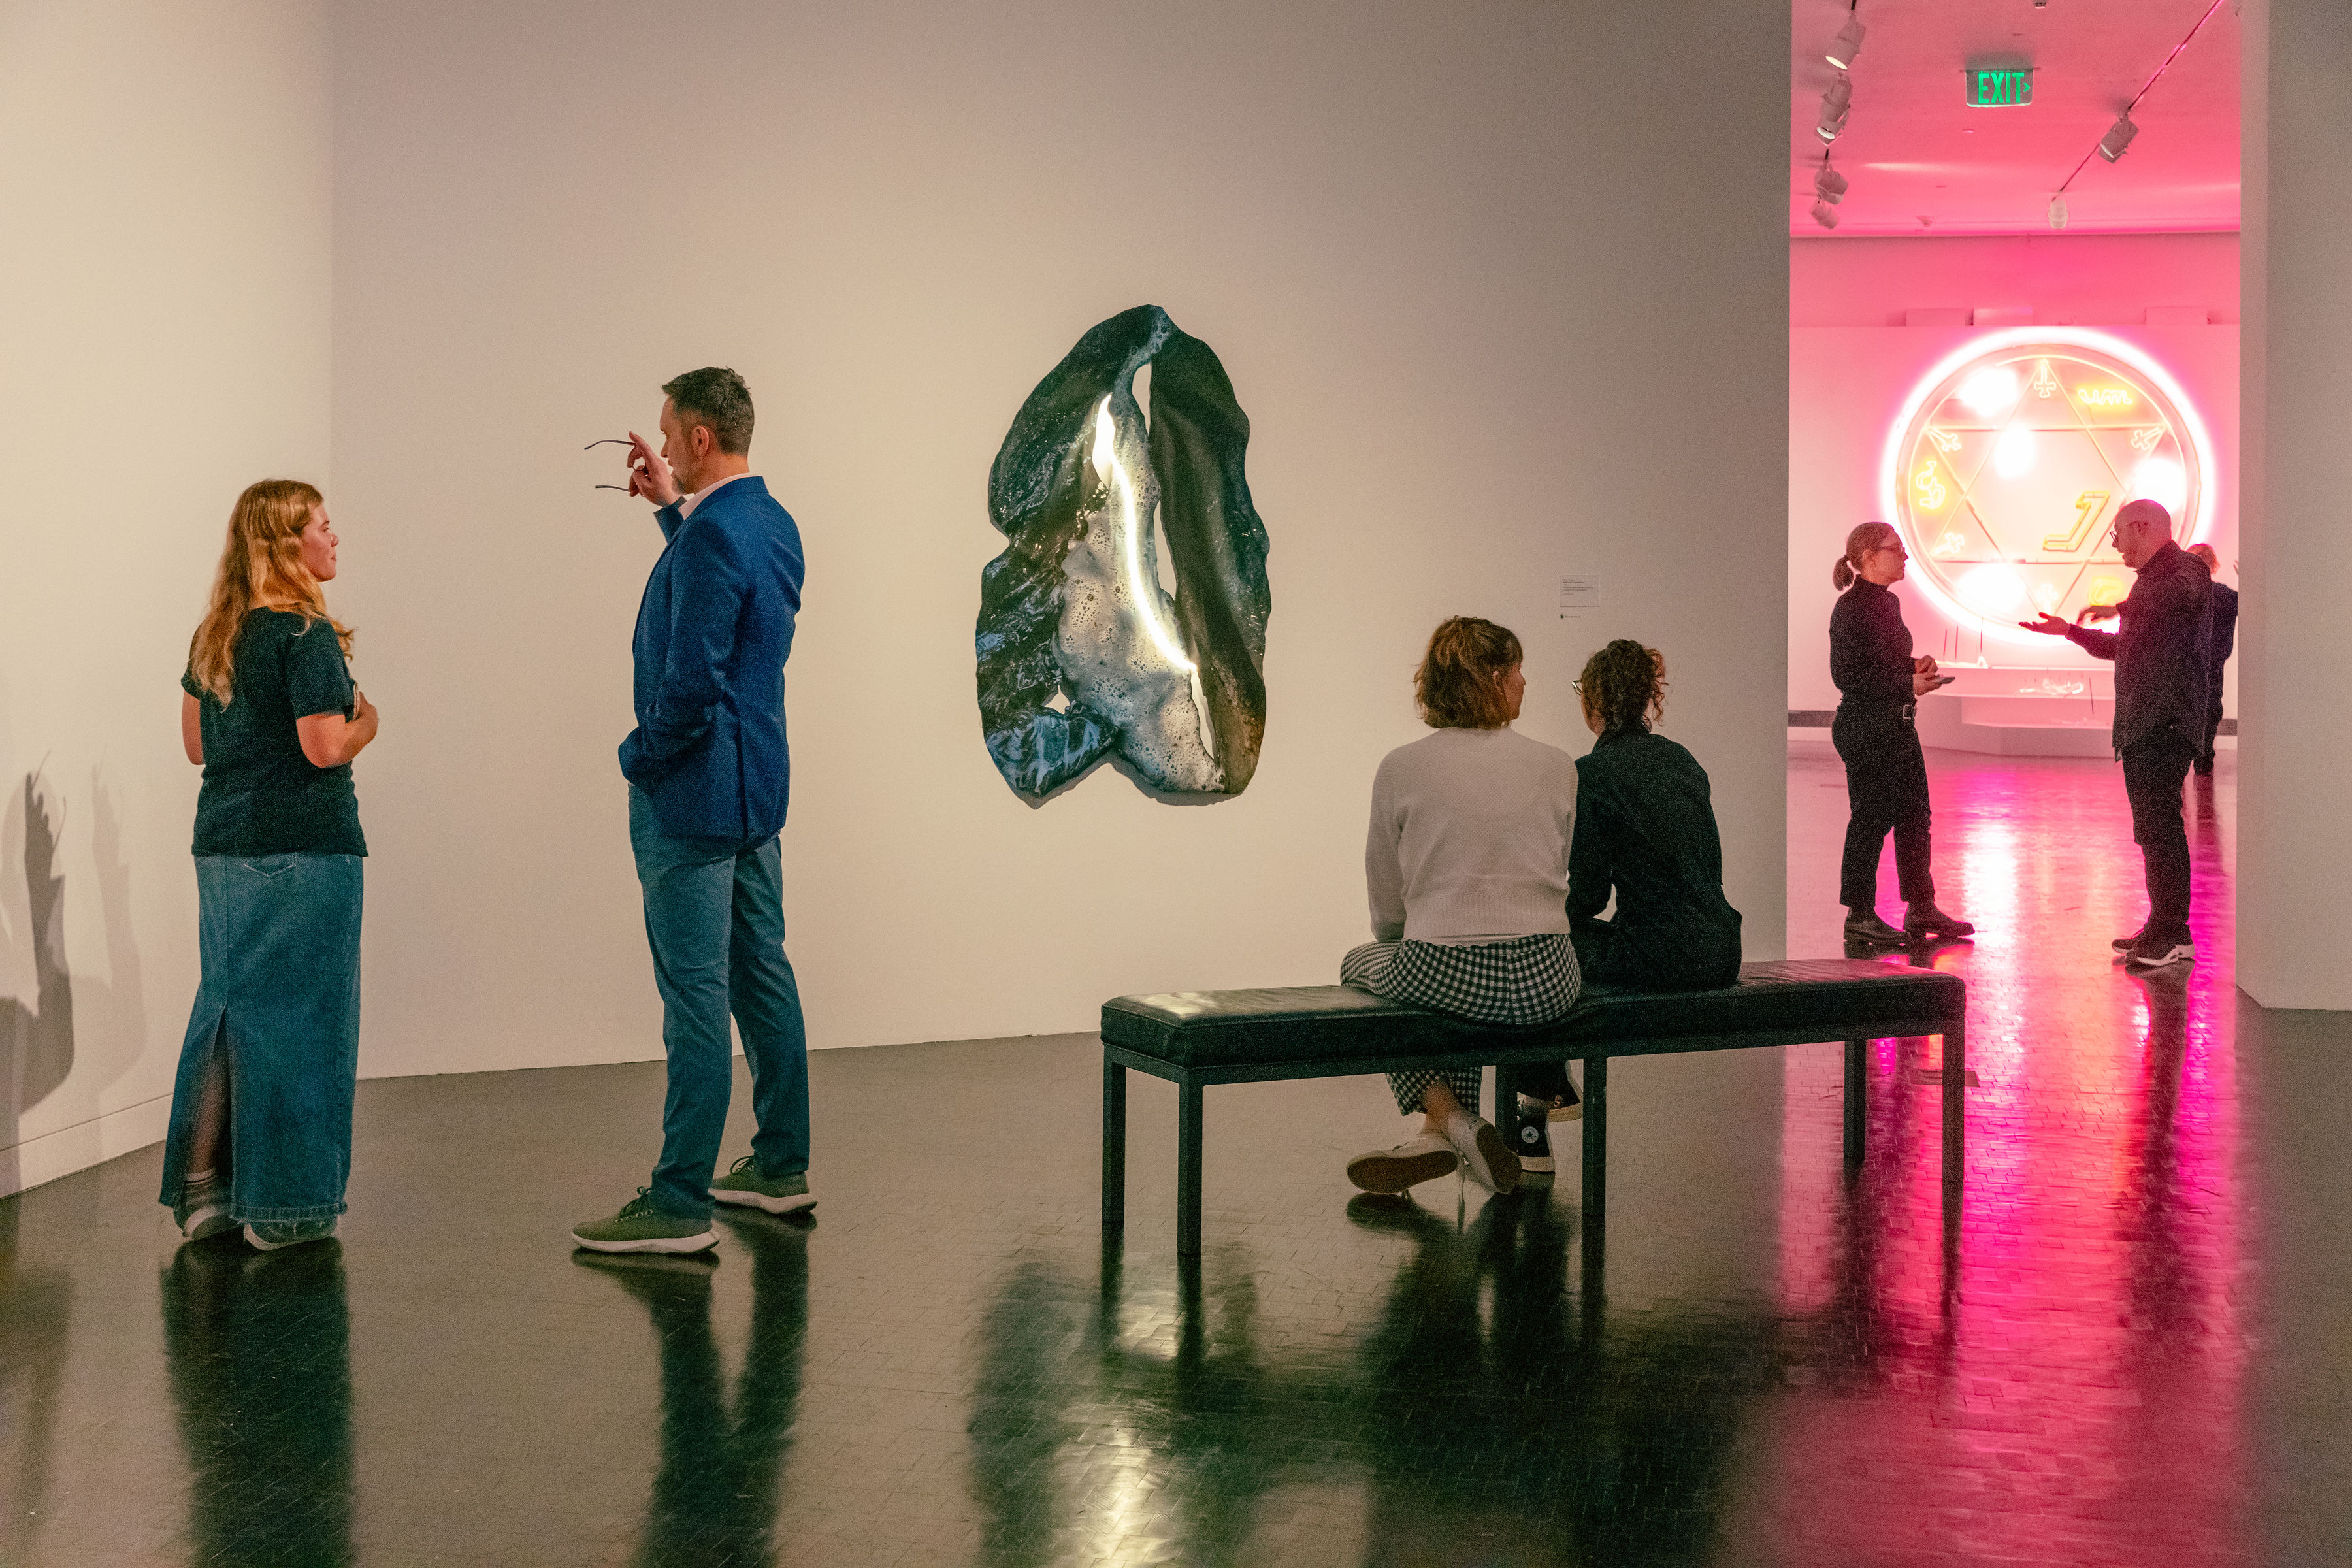 Four people stand and two sit on a bench in a museum exhibition that includes neon artworks glowing pink and white.